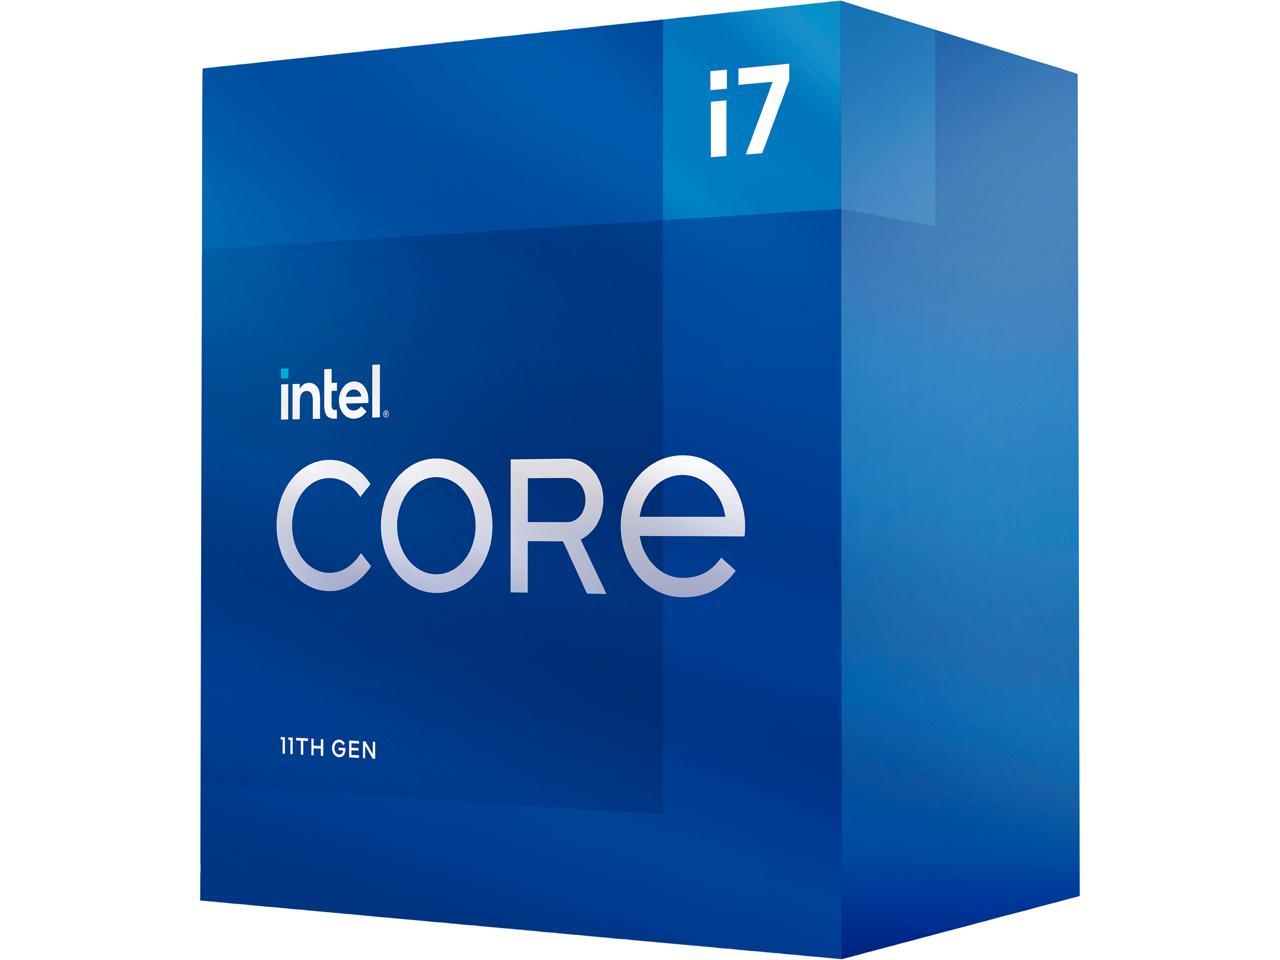 Intel Core i7-11700 (BX8070811700) 8 Core-16 Thread - 2.5 to 4.9 GHz - LGA1200 - Locked Desktop Processor for $194.99 (on clearance) at Best Buy